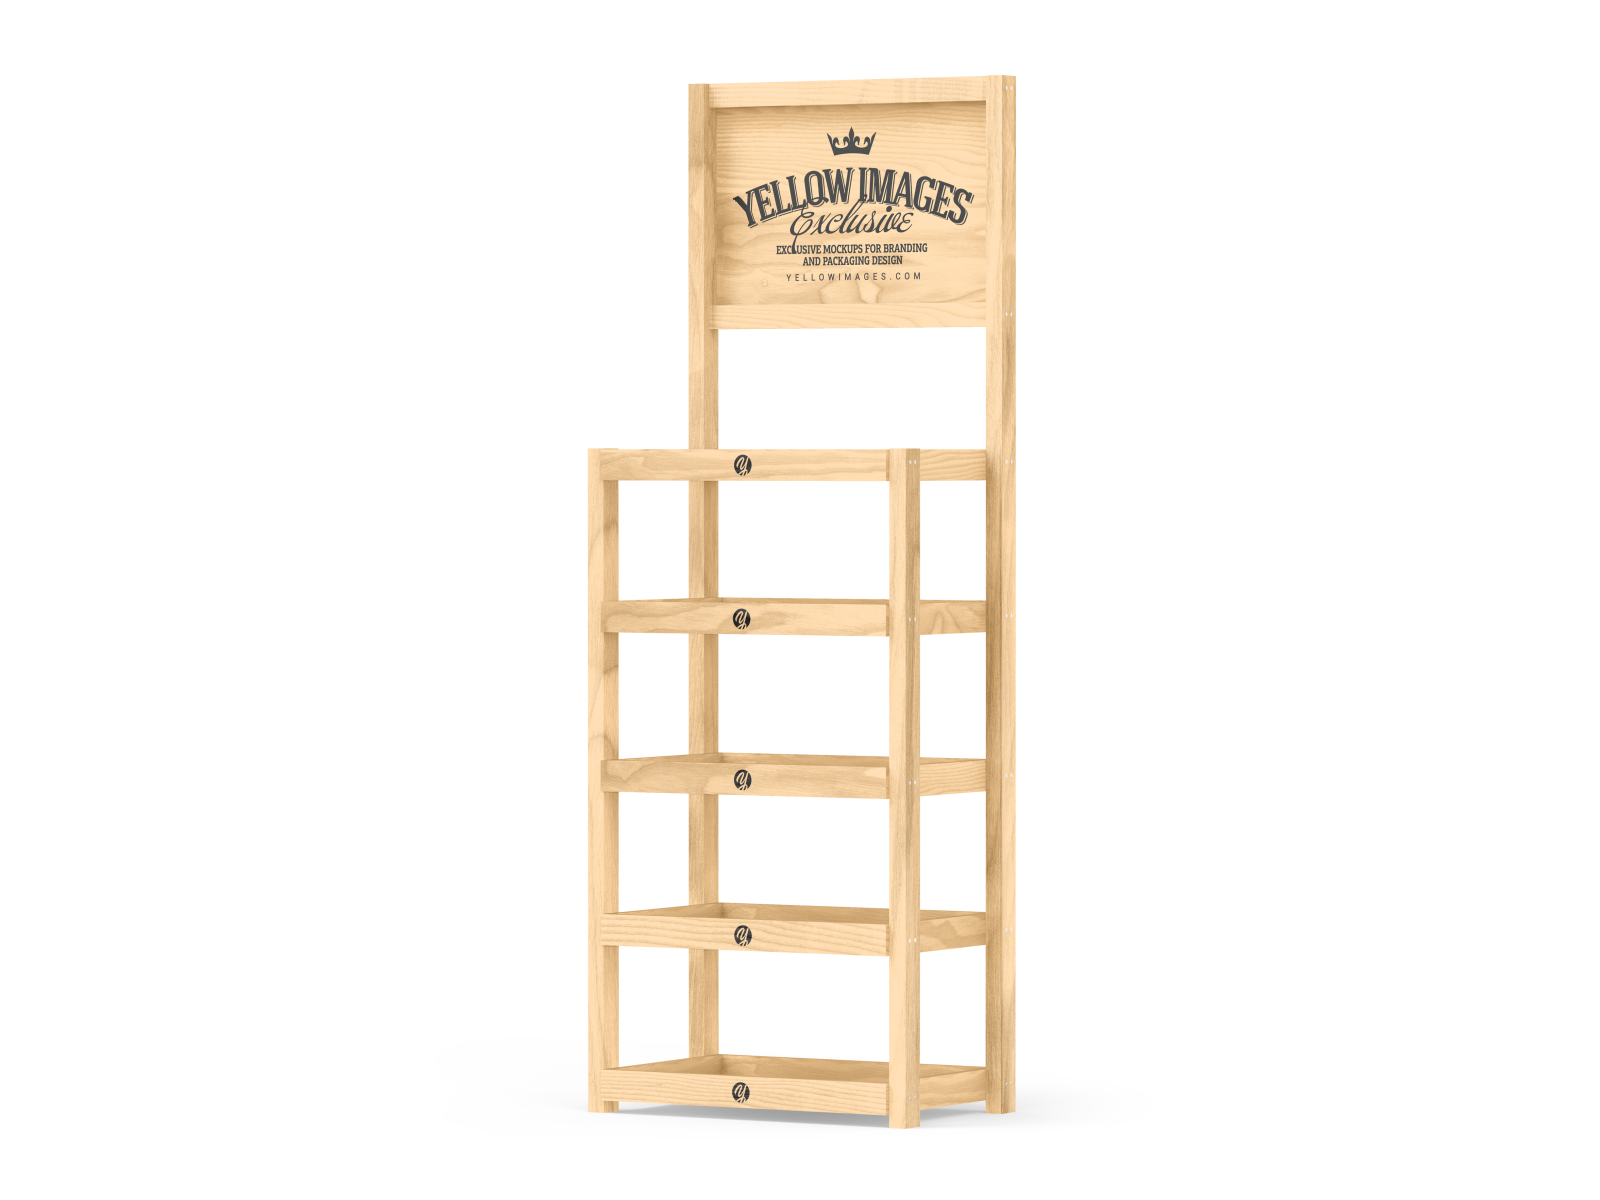 Download Wooden Display Stand Mockup By Vadim On Dribbble PSD Mockup Templates